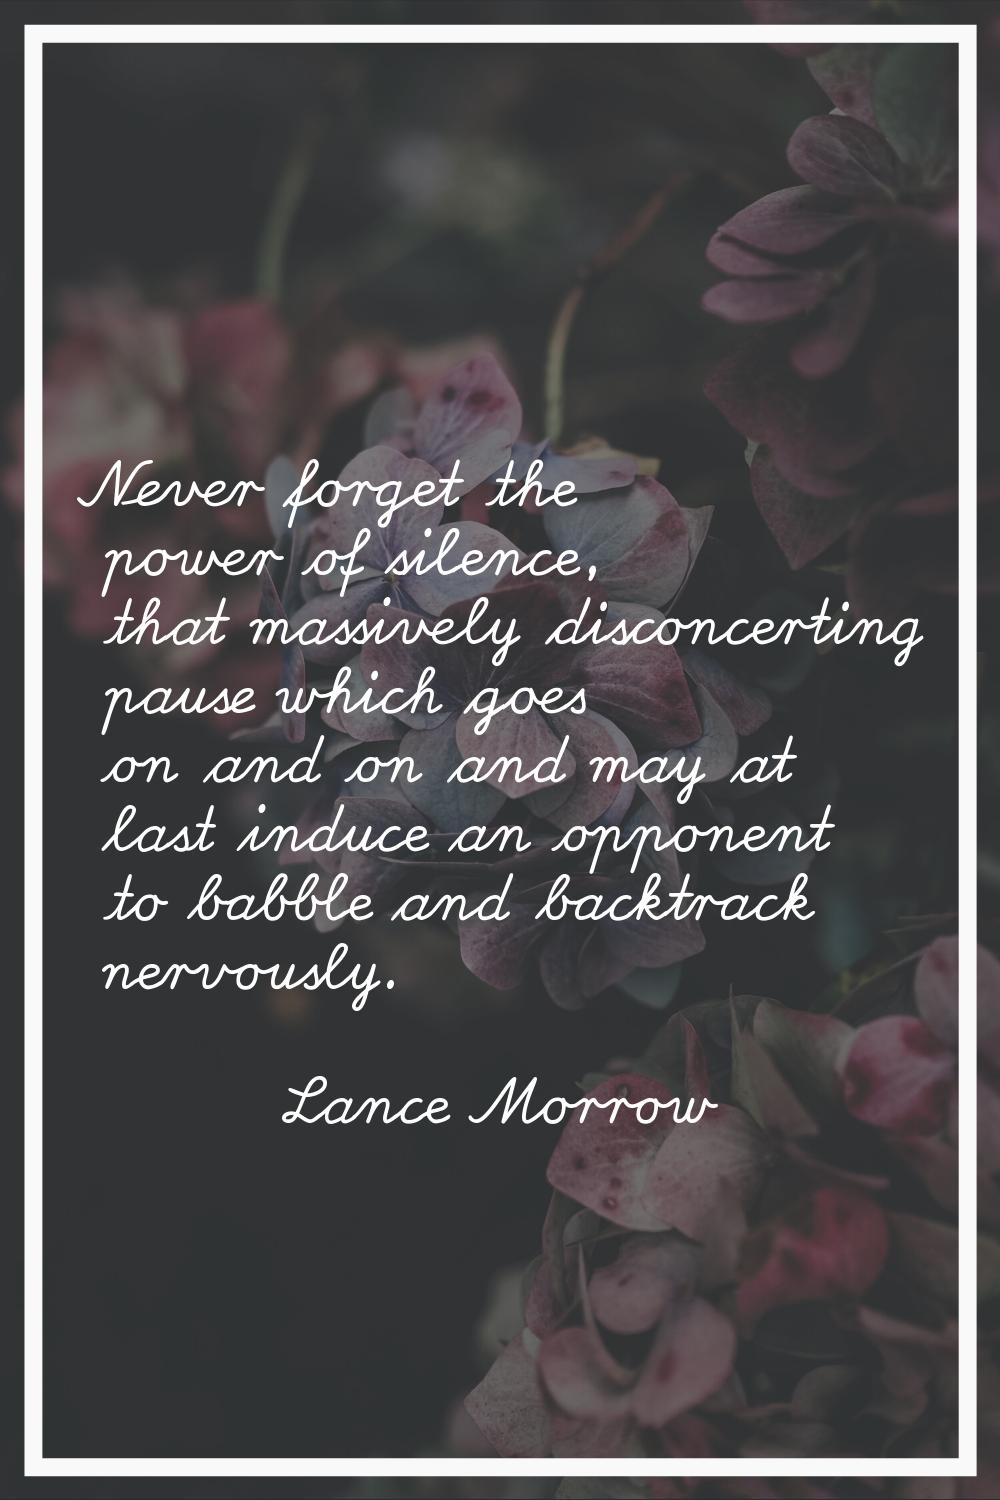 Never forget the power of silence, that massively disconcerting pause which goes on and on and may 